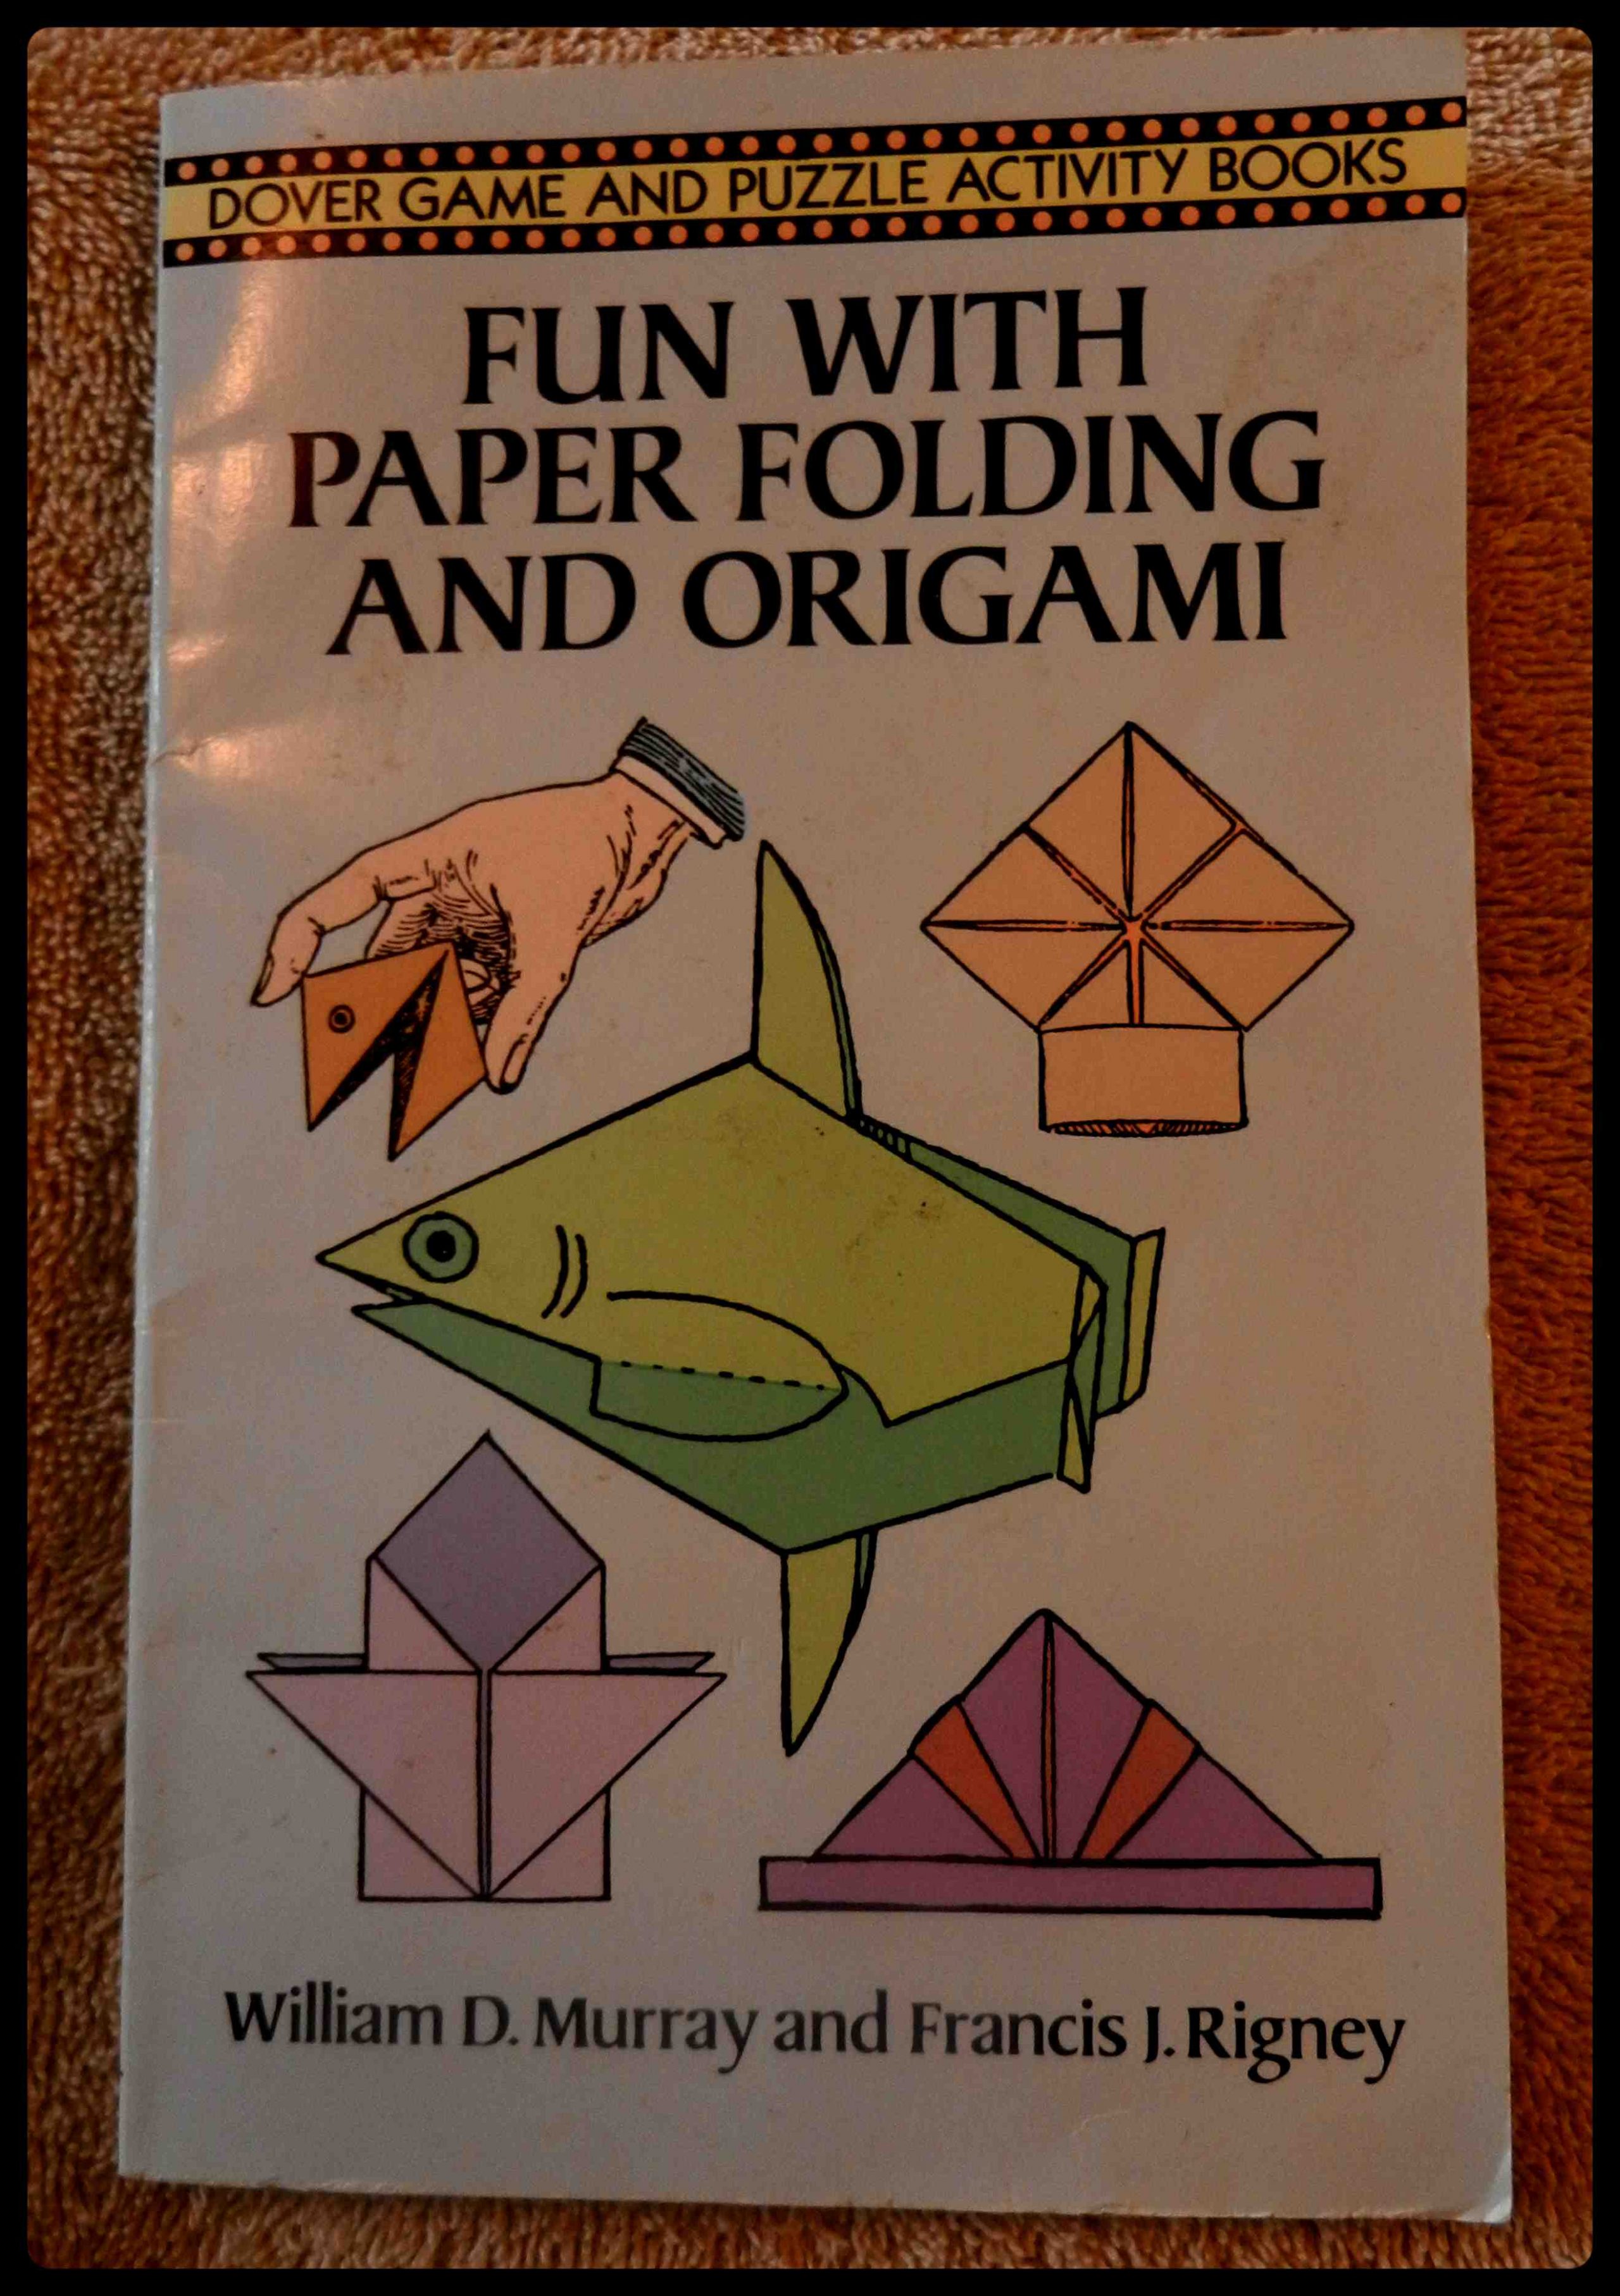 Learn Critical Thinking with -Fun With Origami  – My Review